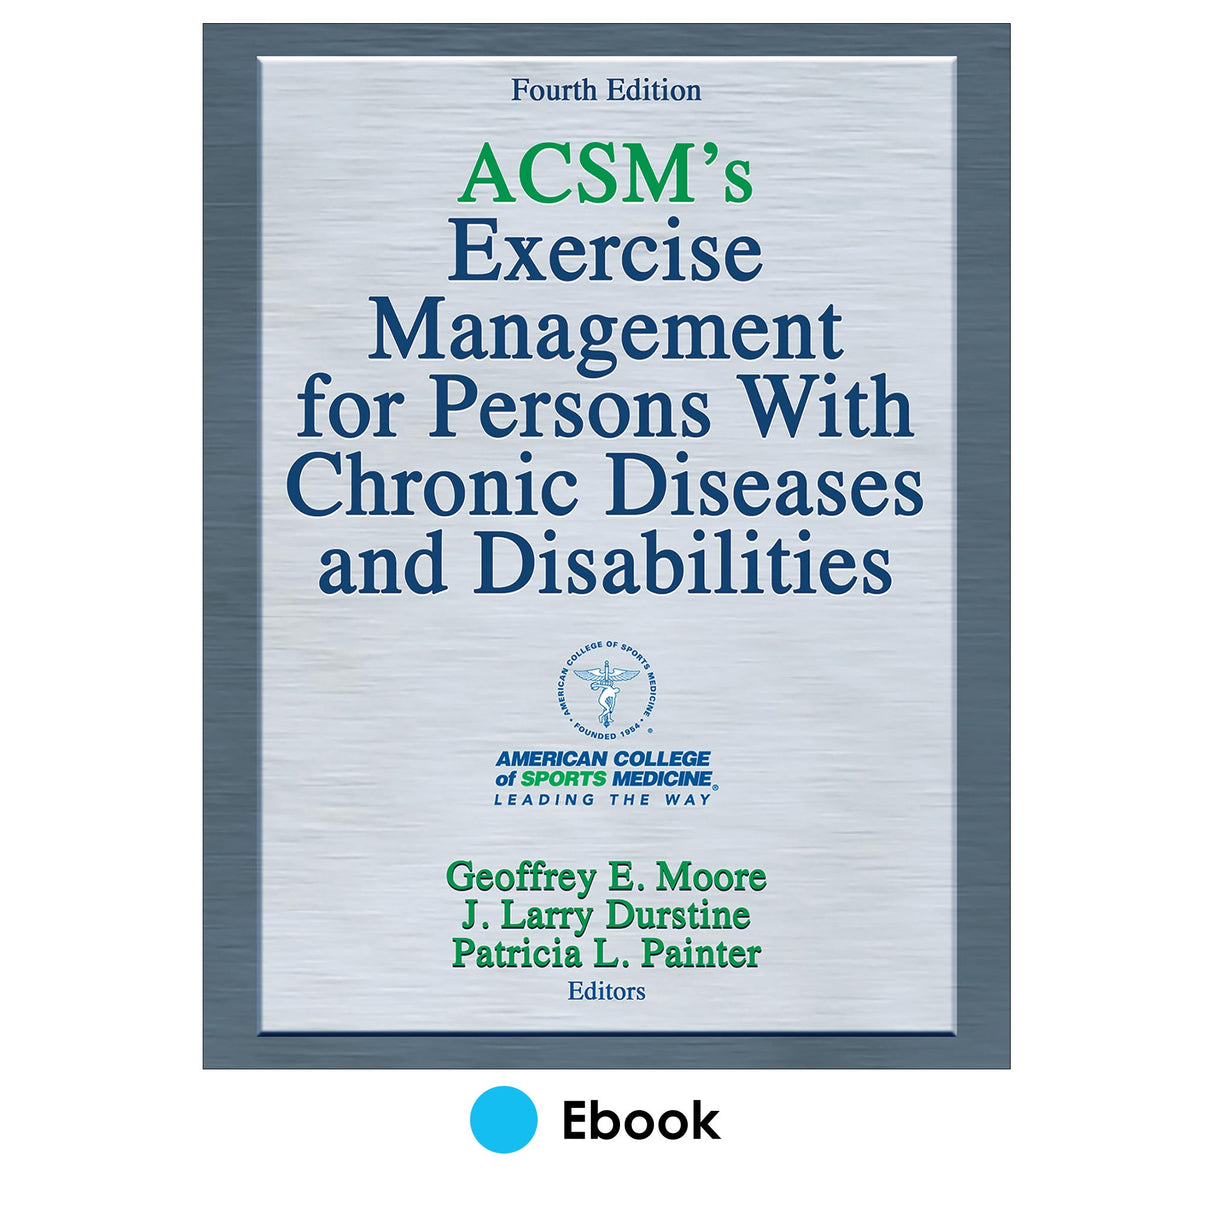 ACSM's Exercise Management for Persons With Chronic Diseases and Disabilities 4th Edition PDF